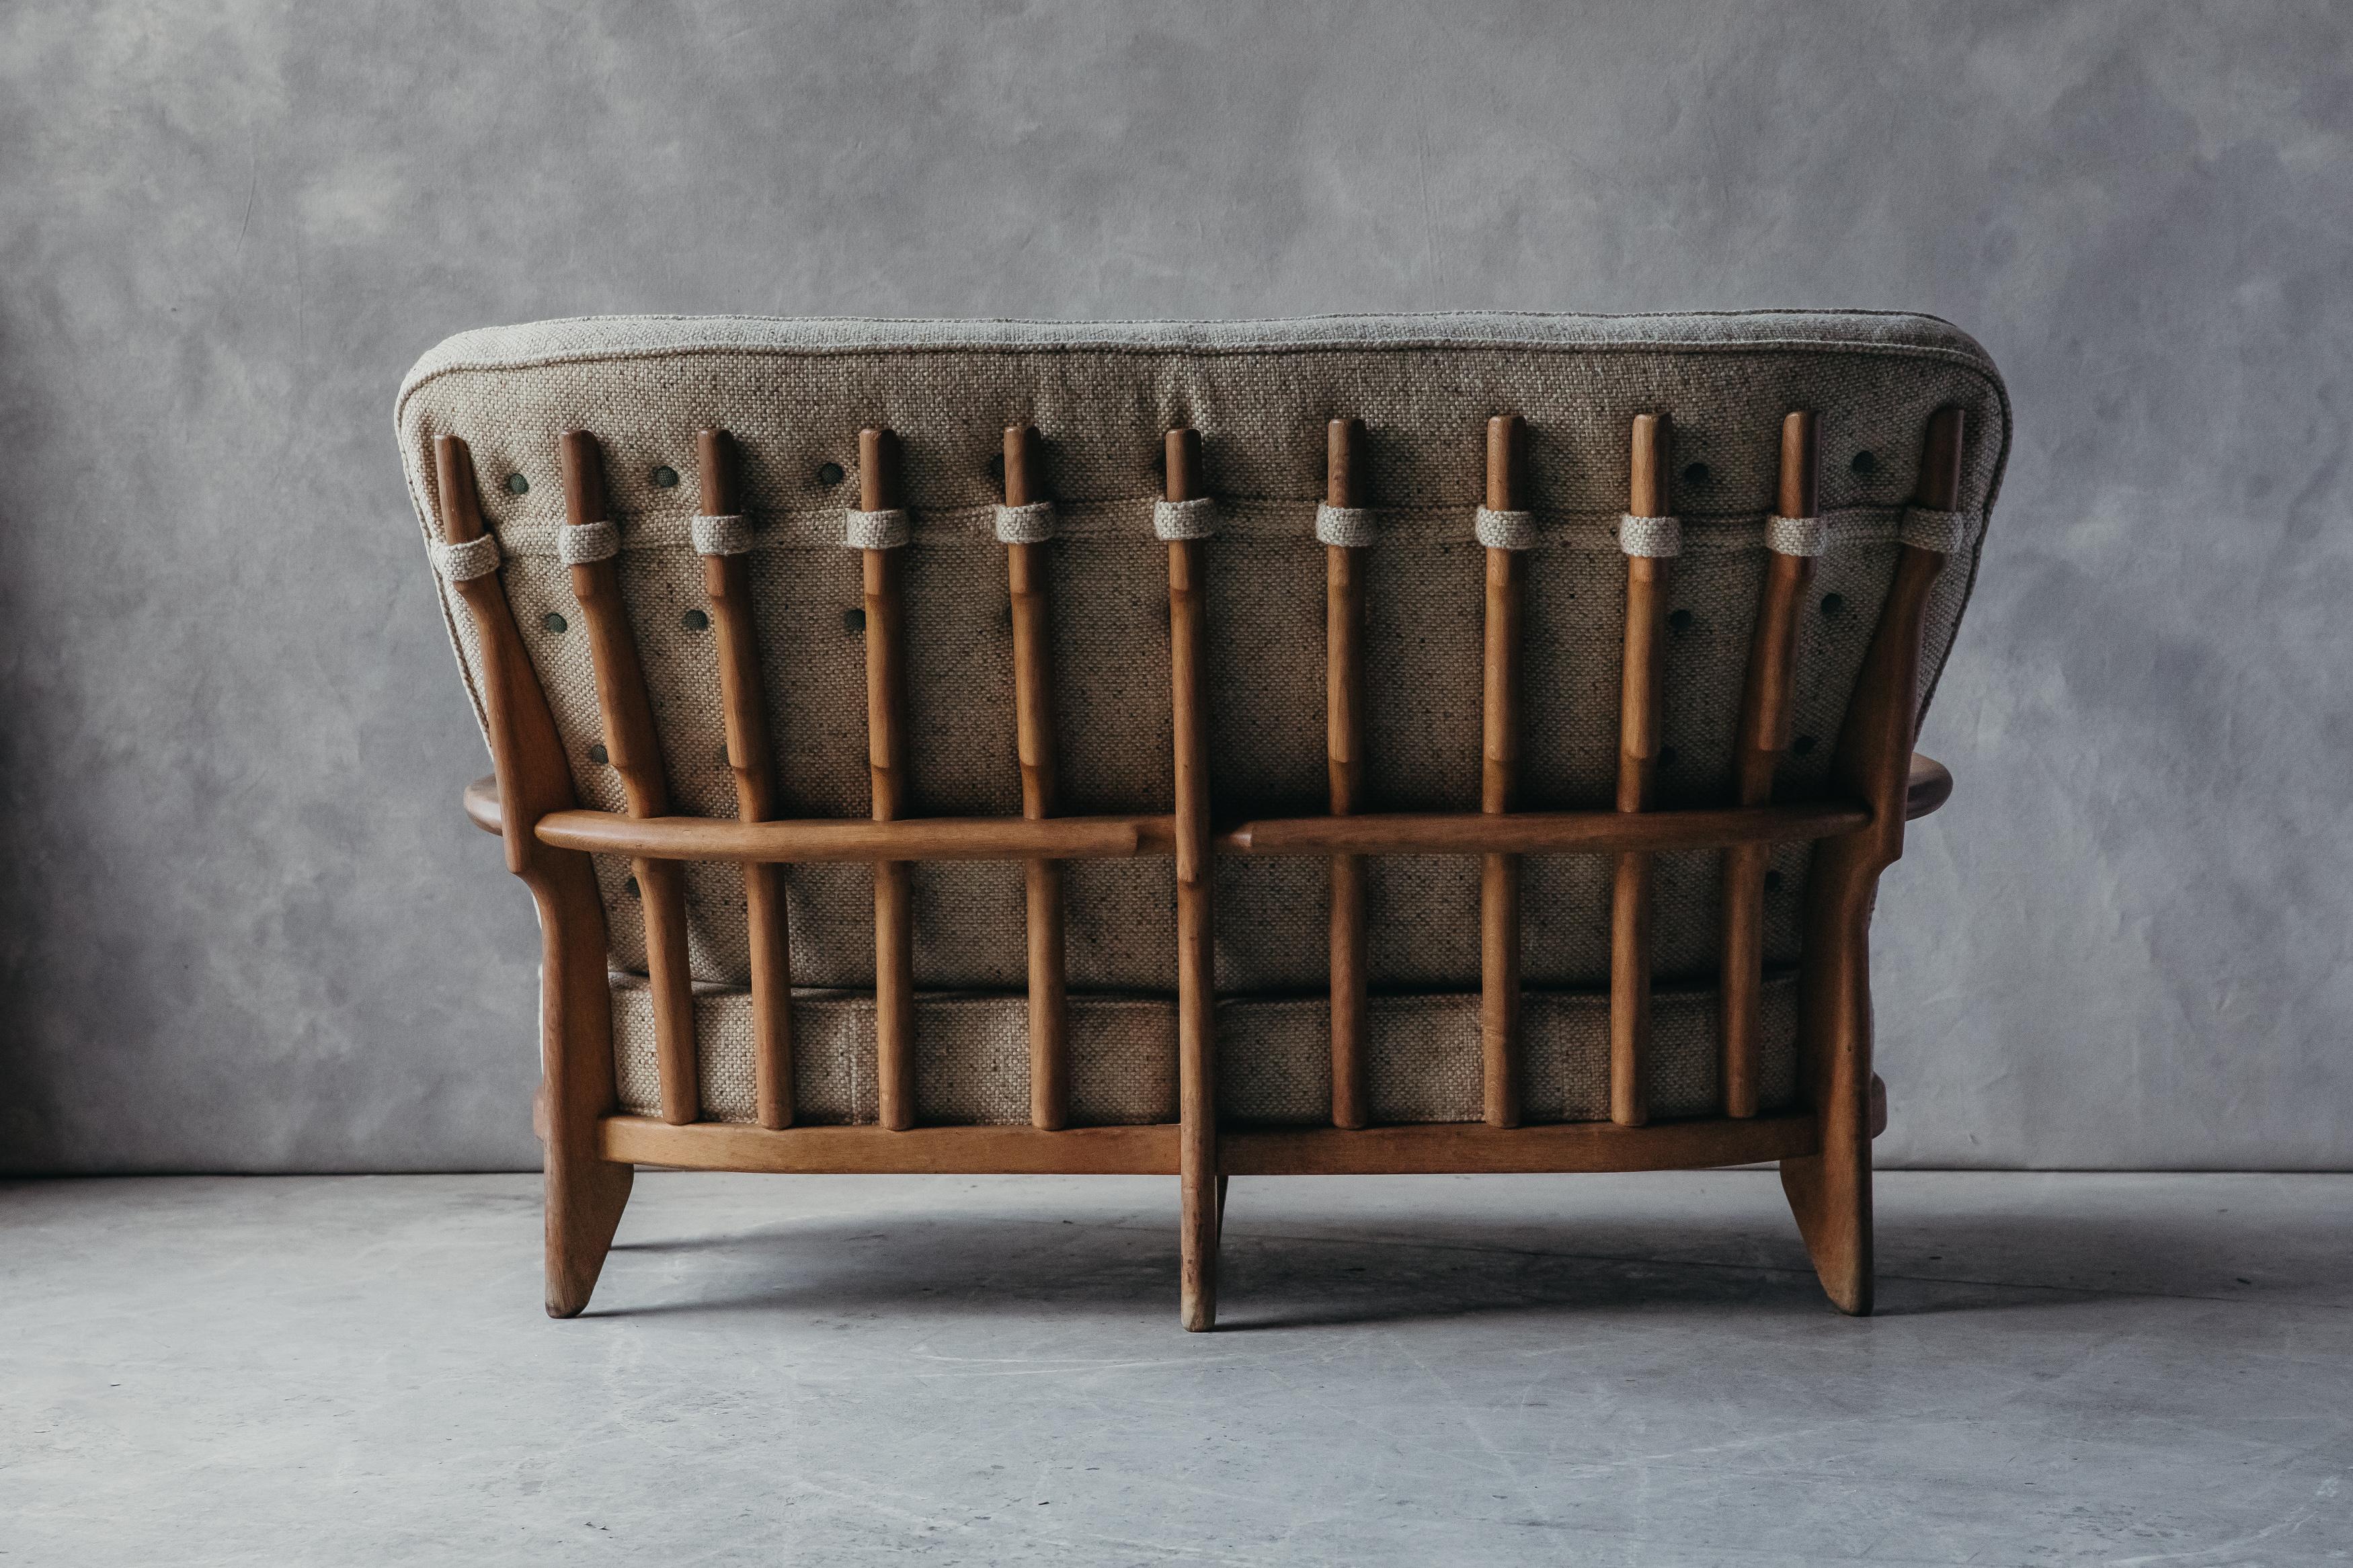 Mid-20th Century Vintage Guillerme et Chambron Sofa from France, circa 1950